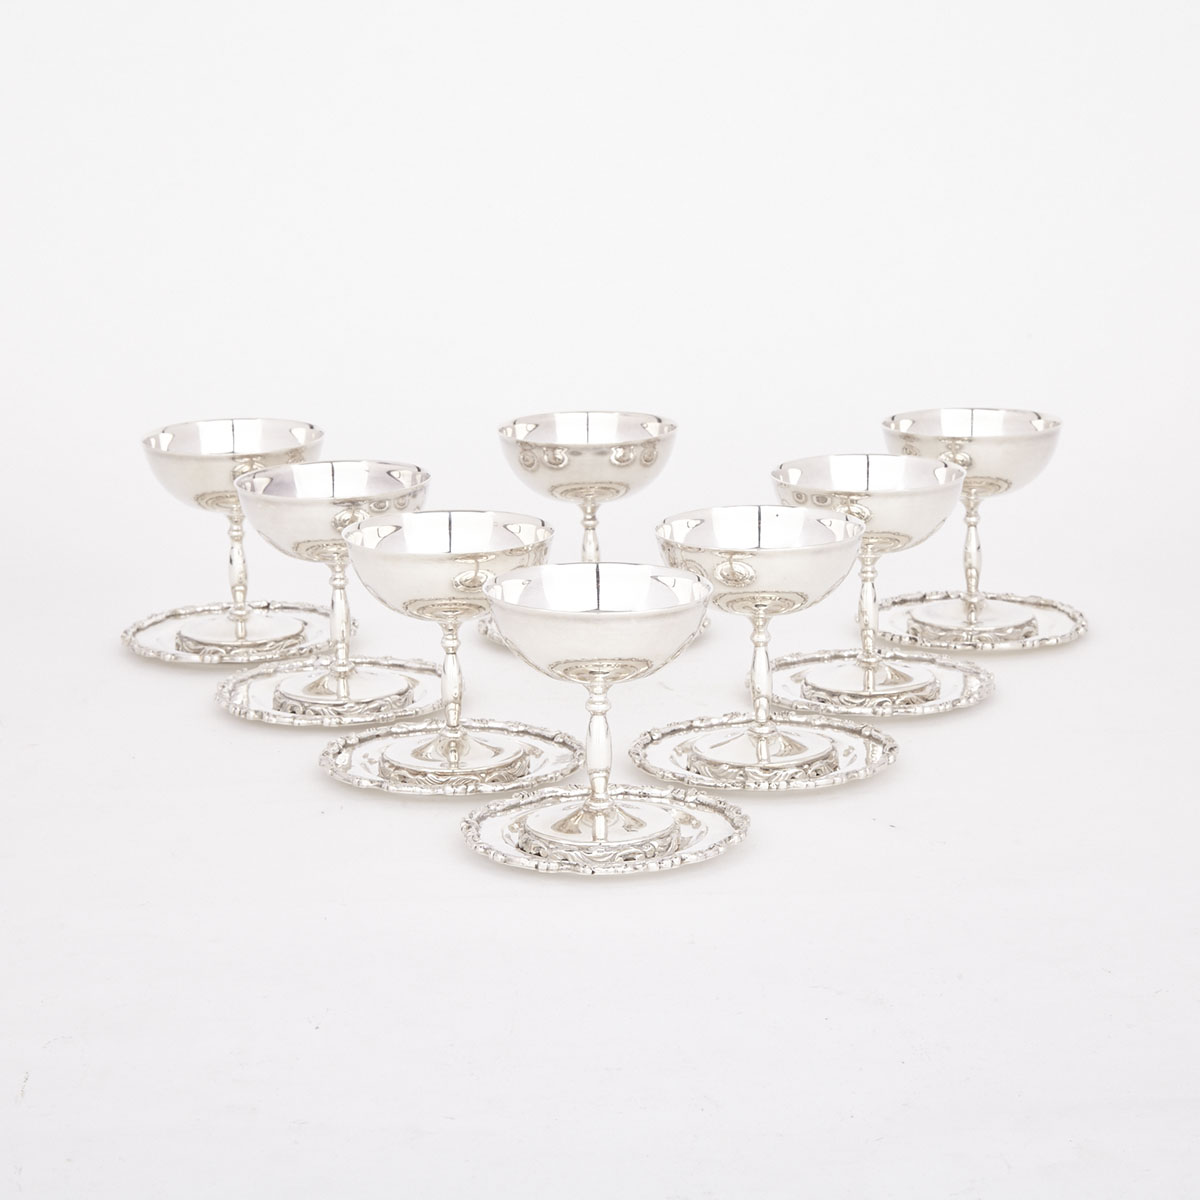 Set of Eight Mexican Silver Champagne or Sherbet Coupes and Stands, mid-20th century